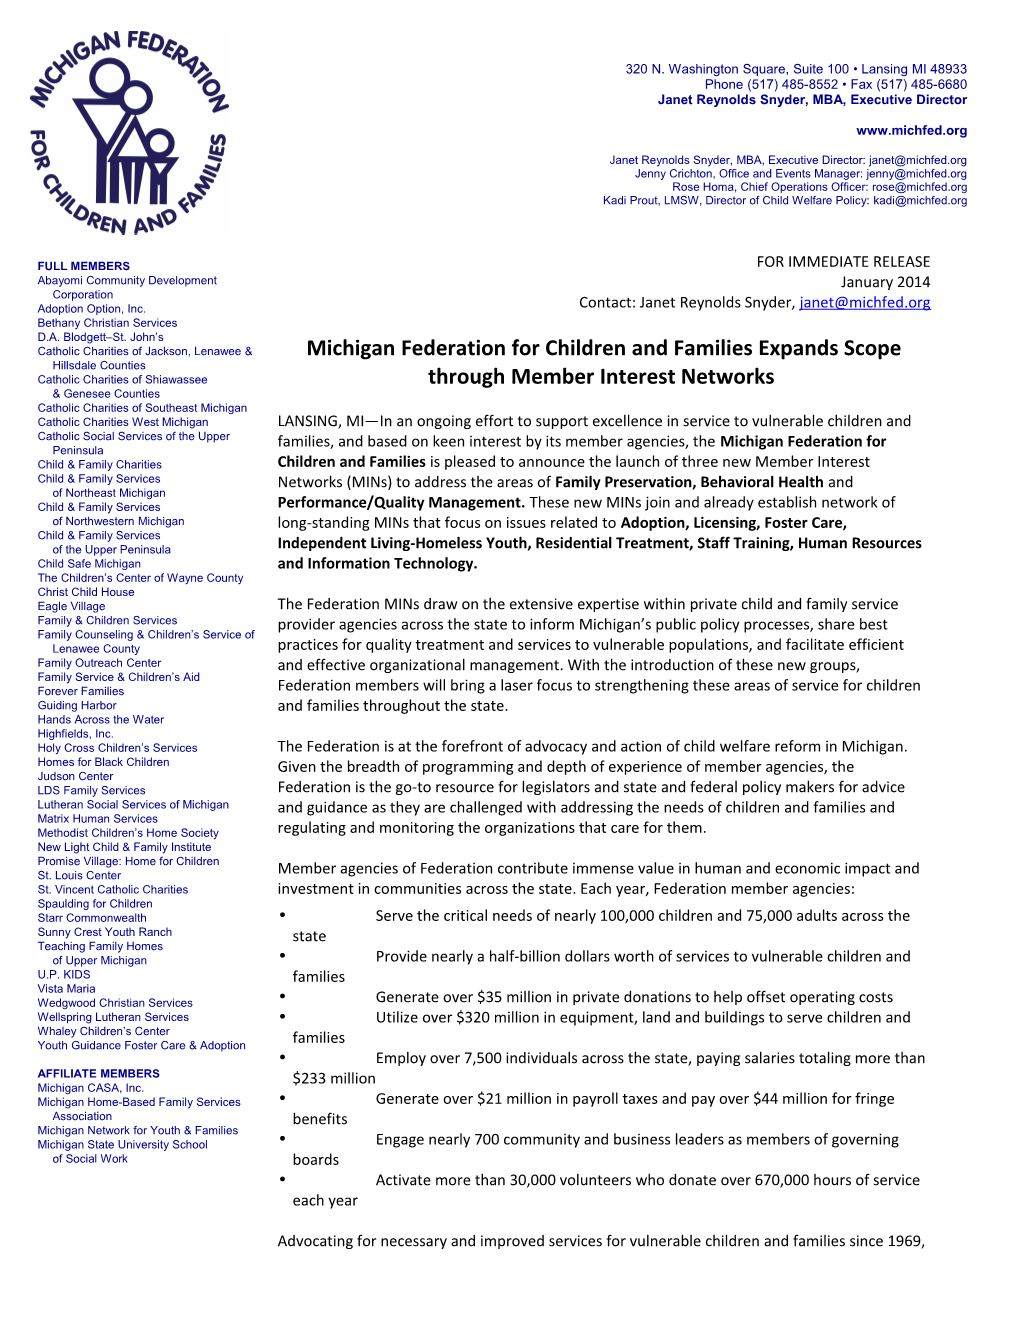 Michigan Federation for Children and Families Expands Scope Through Member Interest Networks